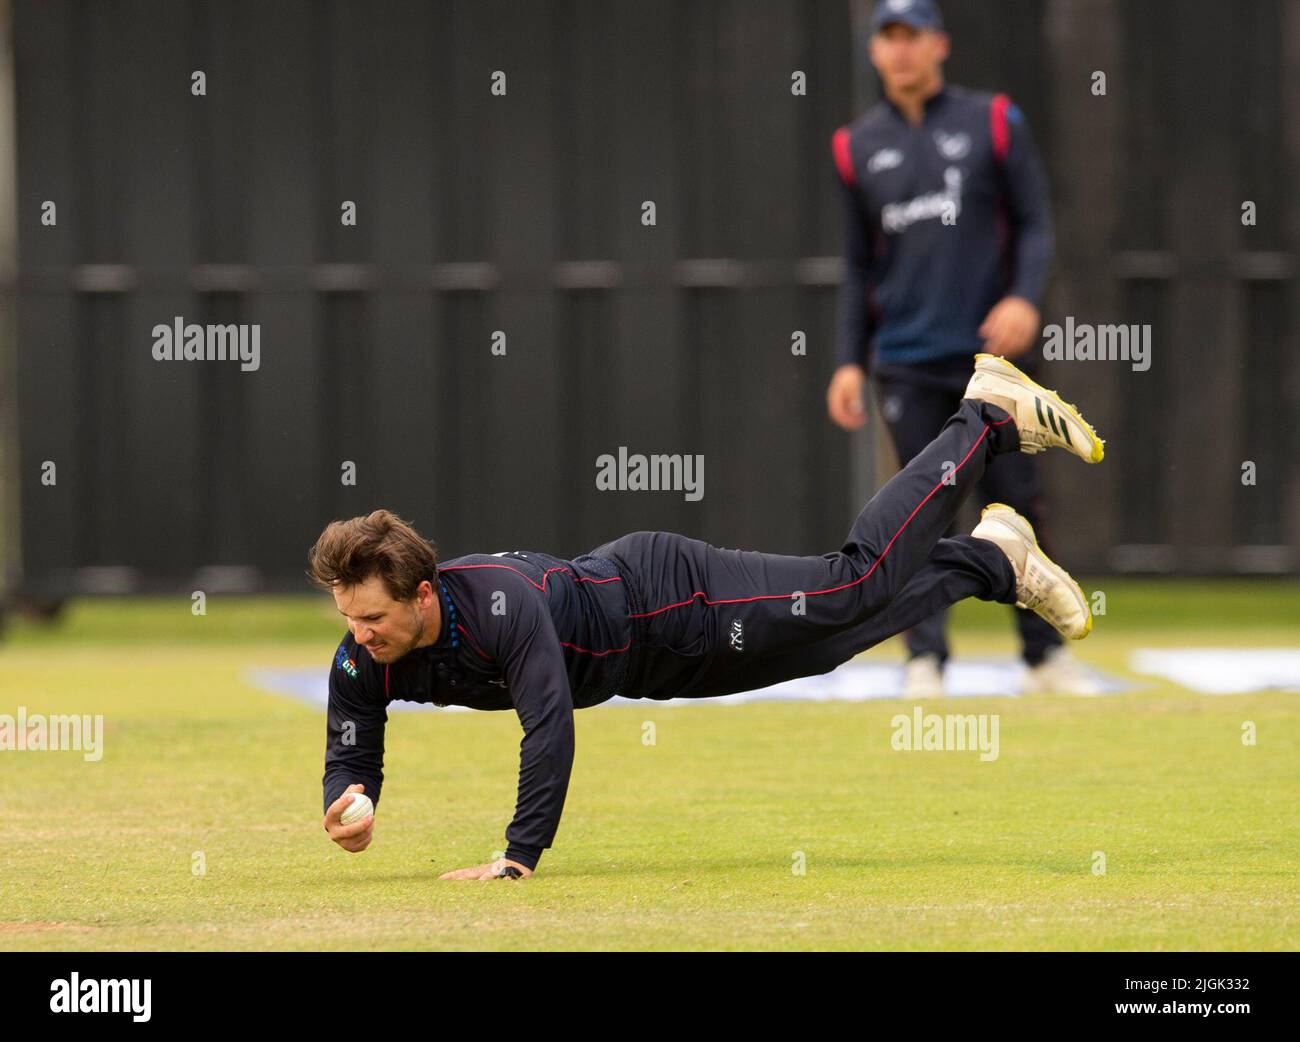 ICC Men's Cricket World Cup League 2 - Nepal v, Namibia. 10th July, 2022. Nepal take on Namibia in the ICC Men's Cricket World Cup League 2 at Cambusdoon, Ayr. Pic shows: Great fielding by Namibia's Jan Nicol Loftie-Eaton, Credit: Ian Jacobs/Alamy Live News Stock Photo